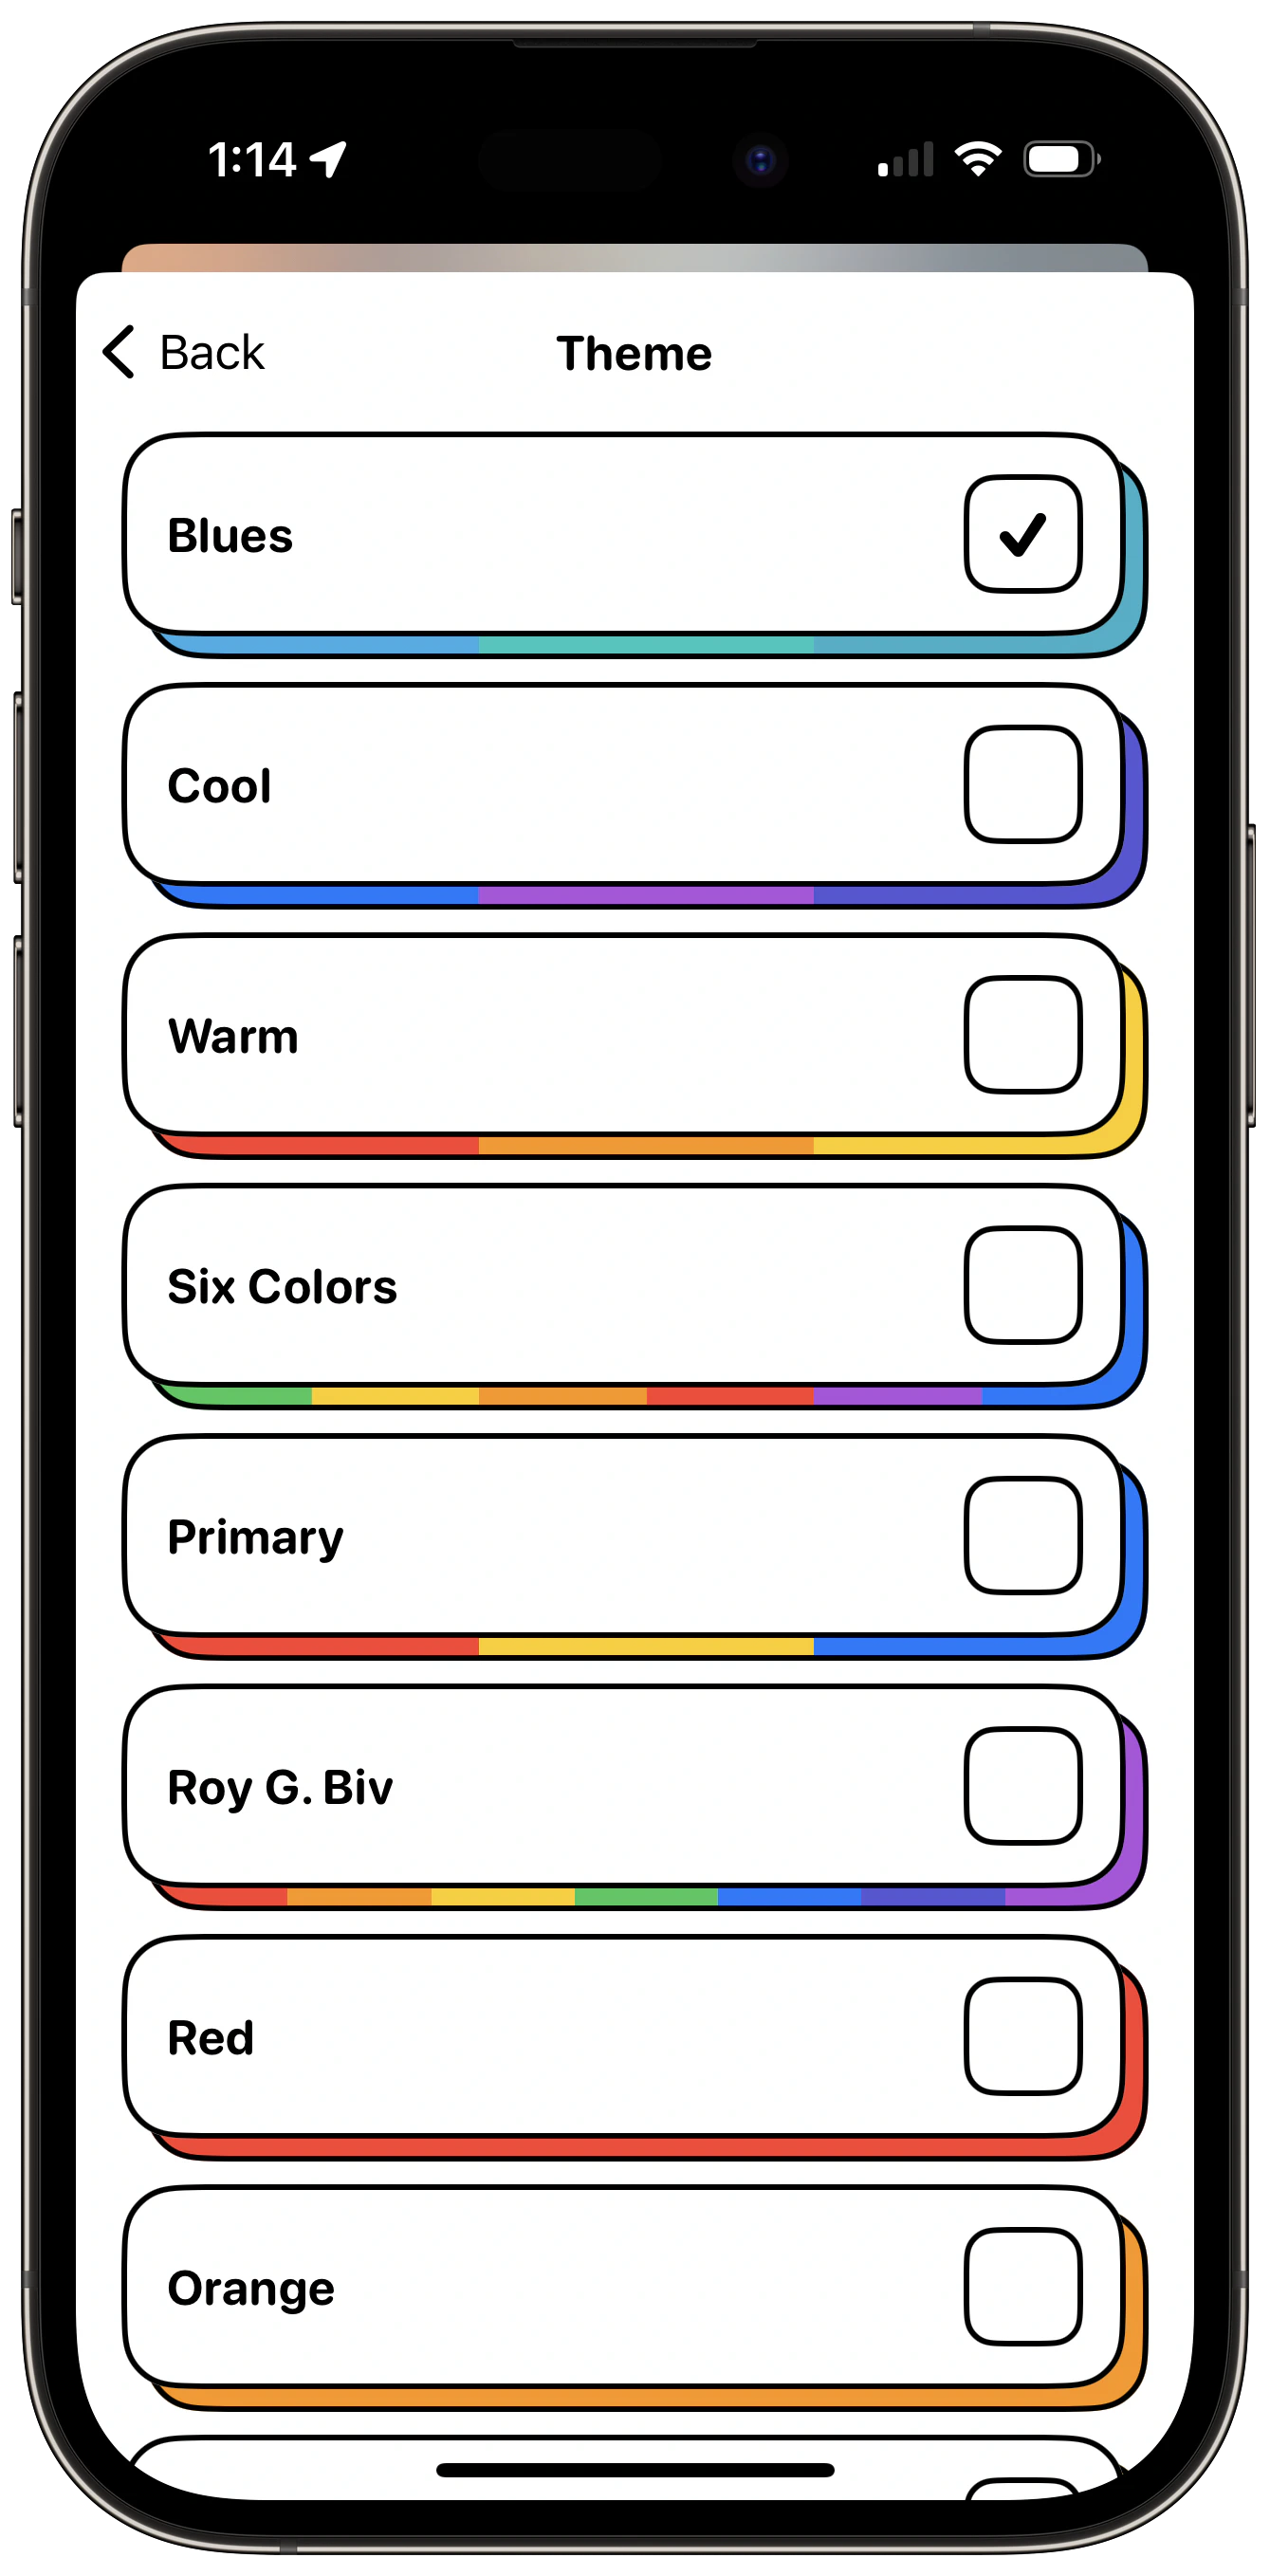 A screenshot showing several color theme options